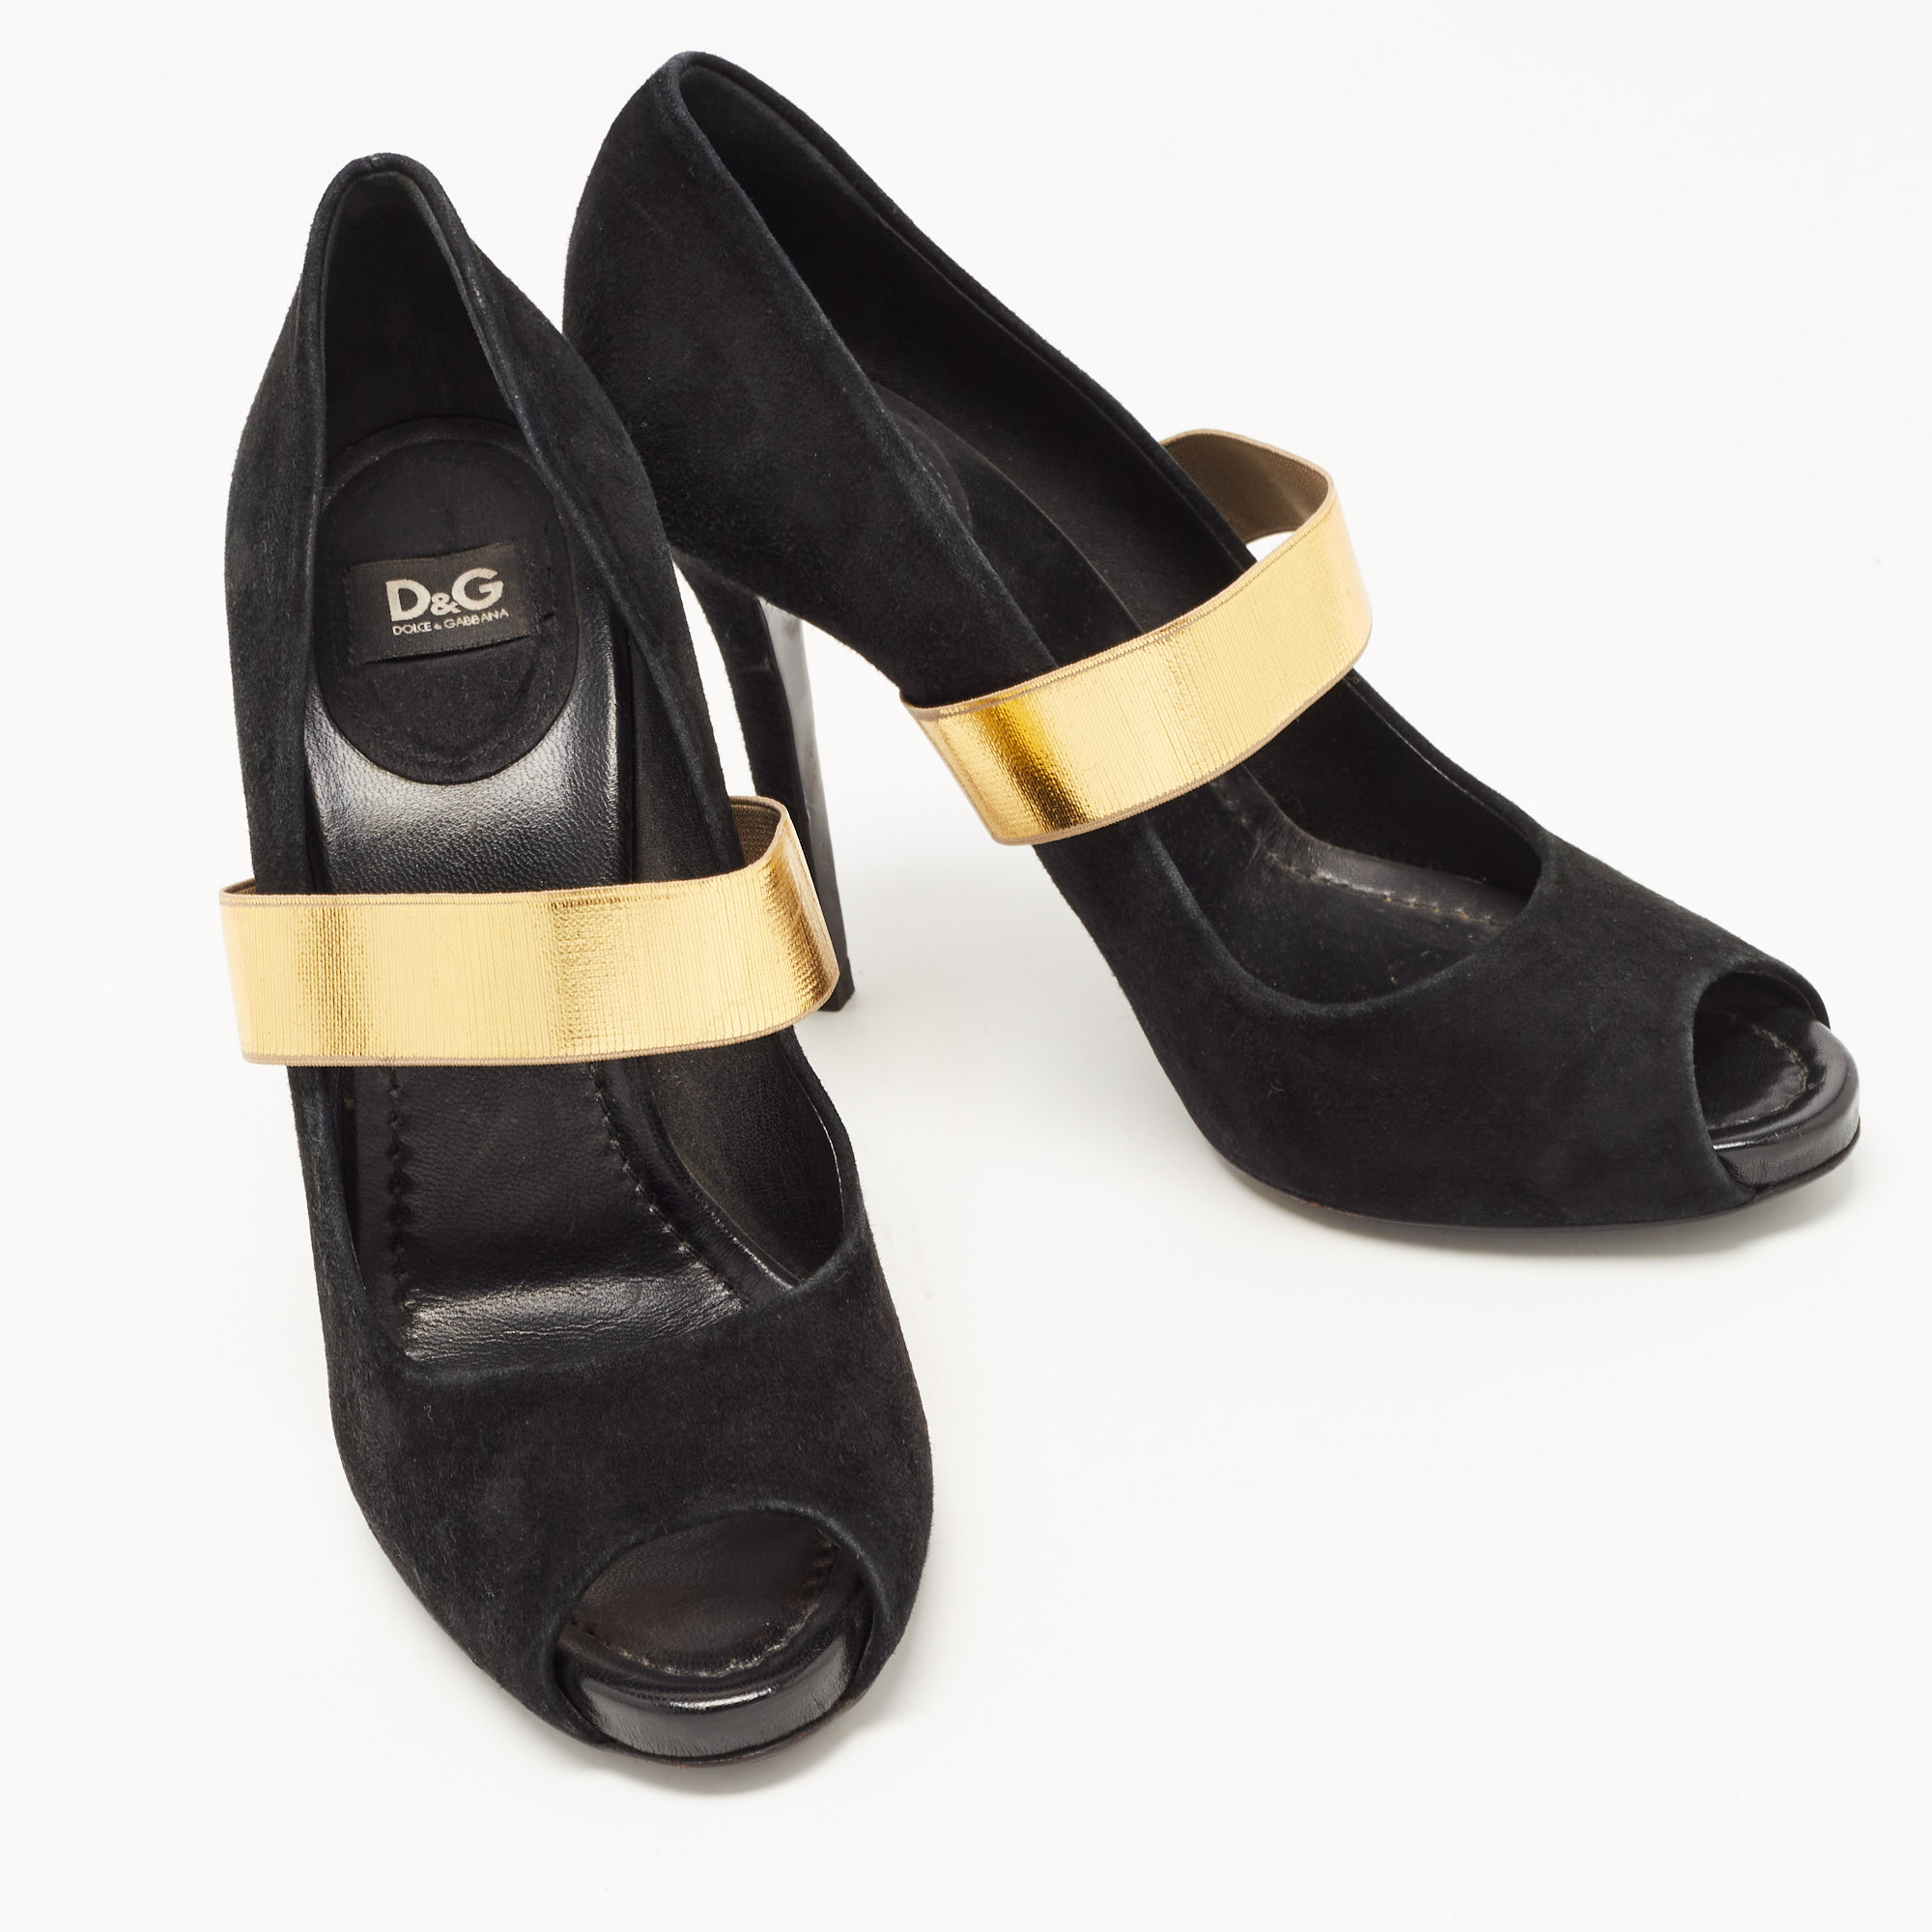 Dolce & Gabbana Black/Gold Suede And Elastic Band Mary Jane Peep Toe Pumps Size 39